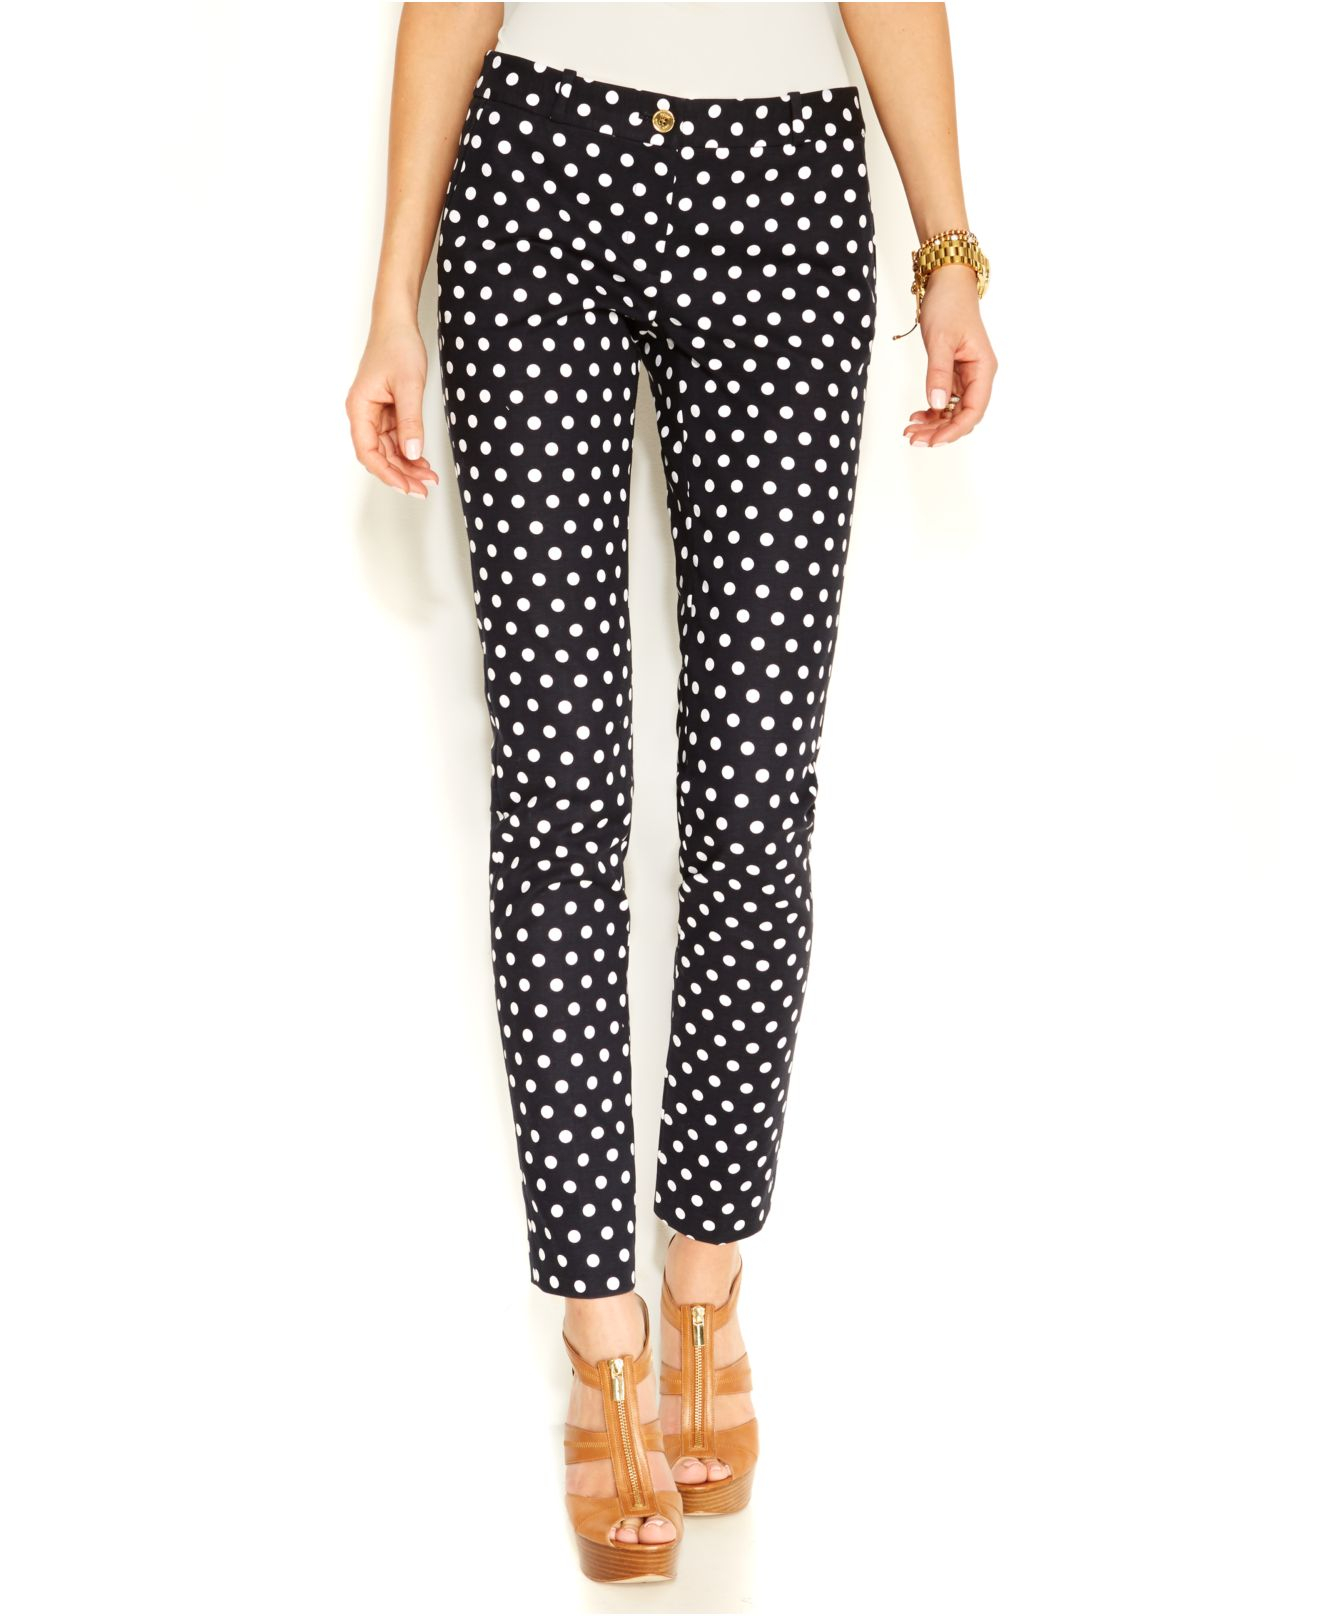 NWT The Limited Cobalt Blue Polka Dot Pants lowest whole network.